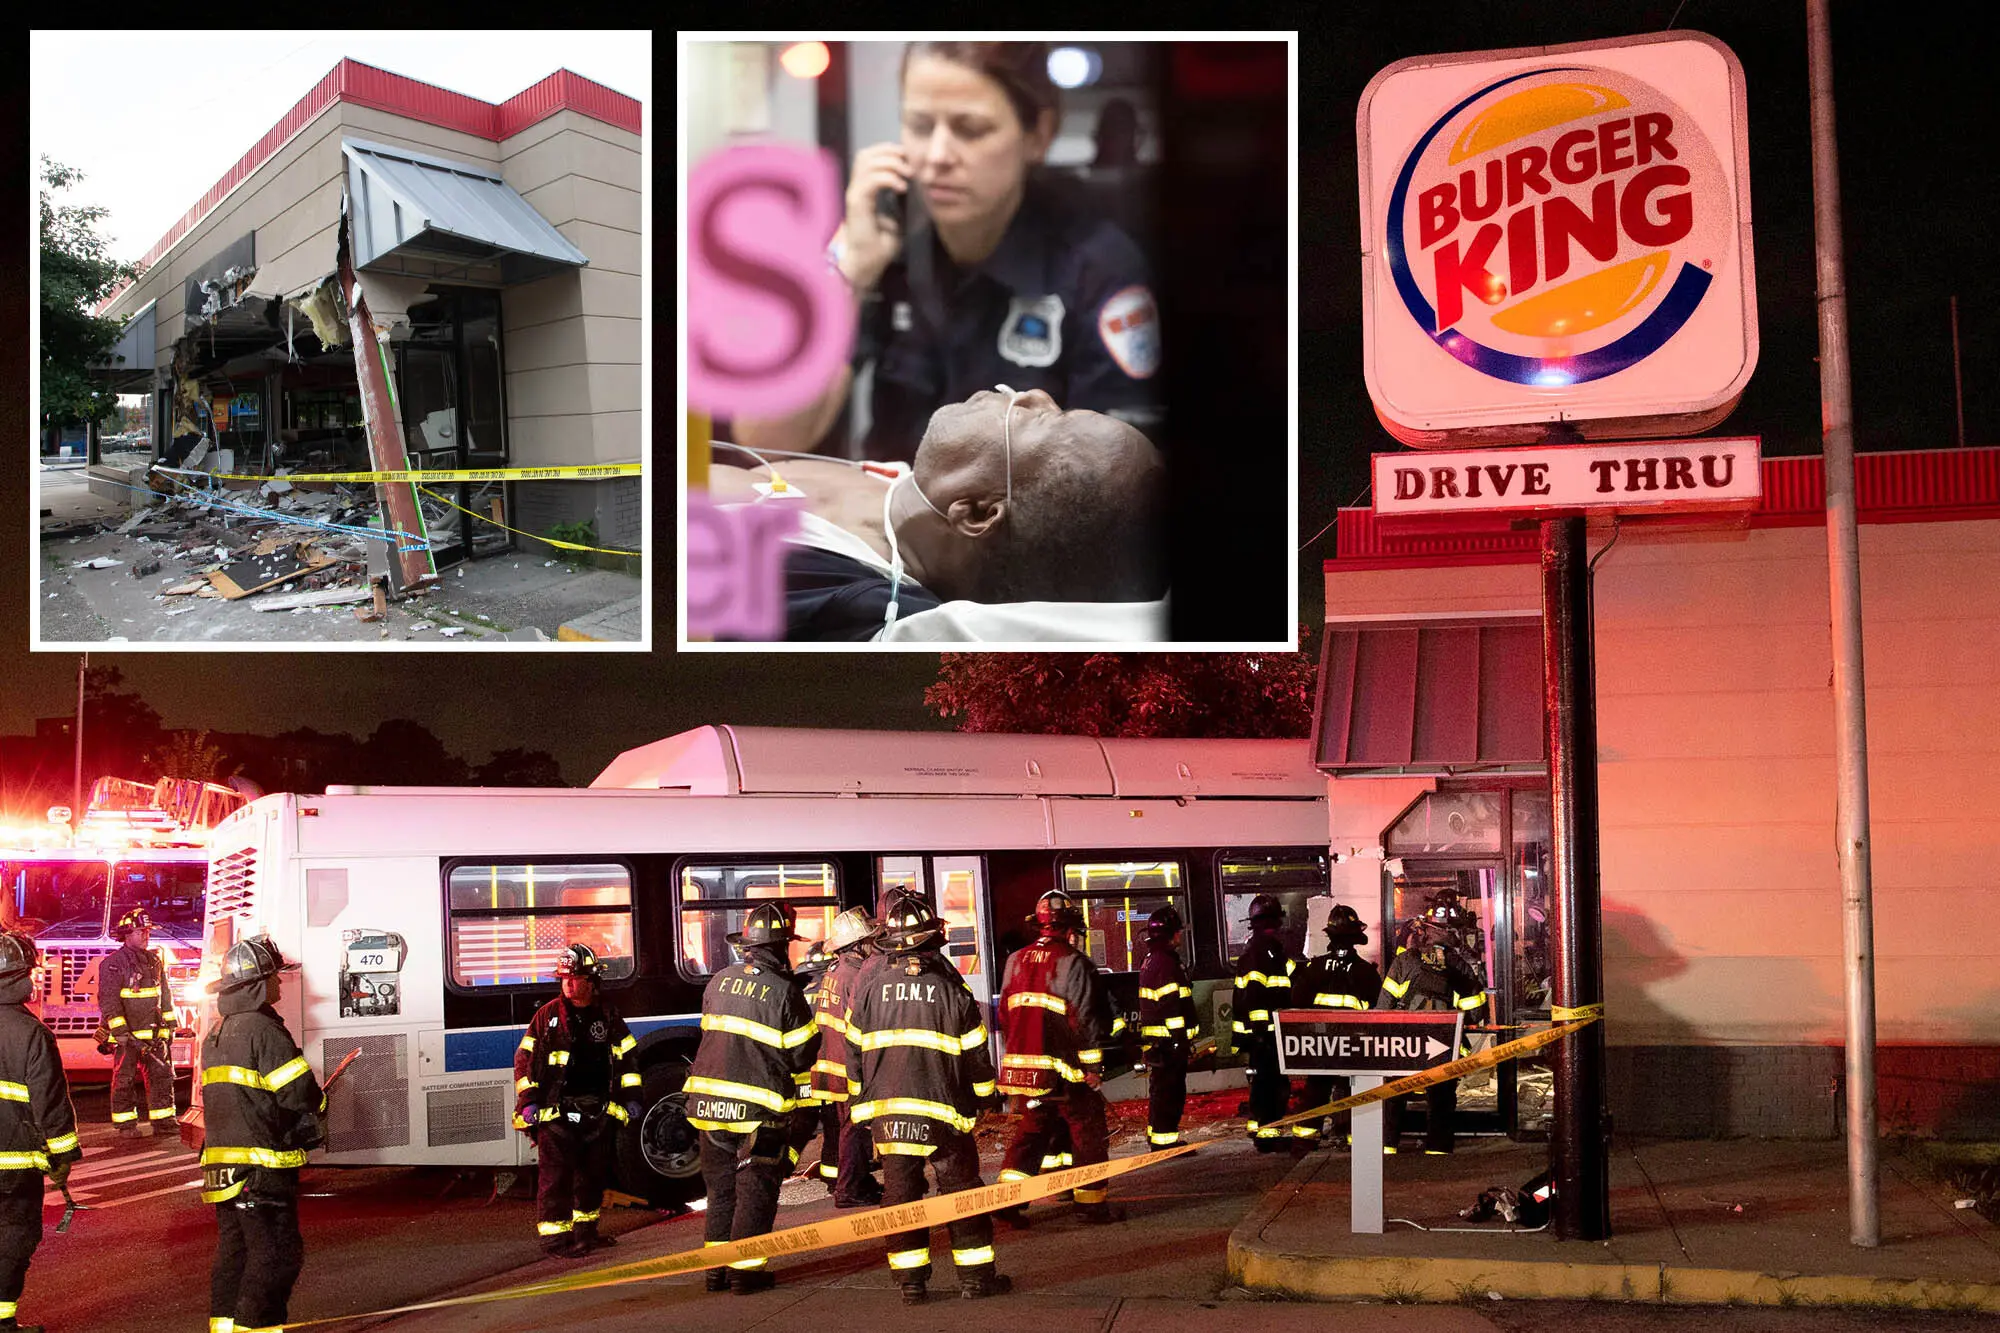 Bus Crashes into Burger King in New York City